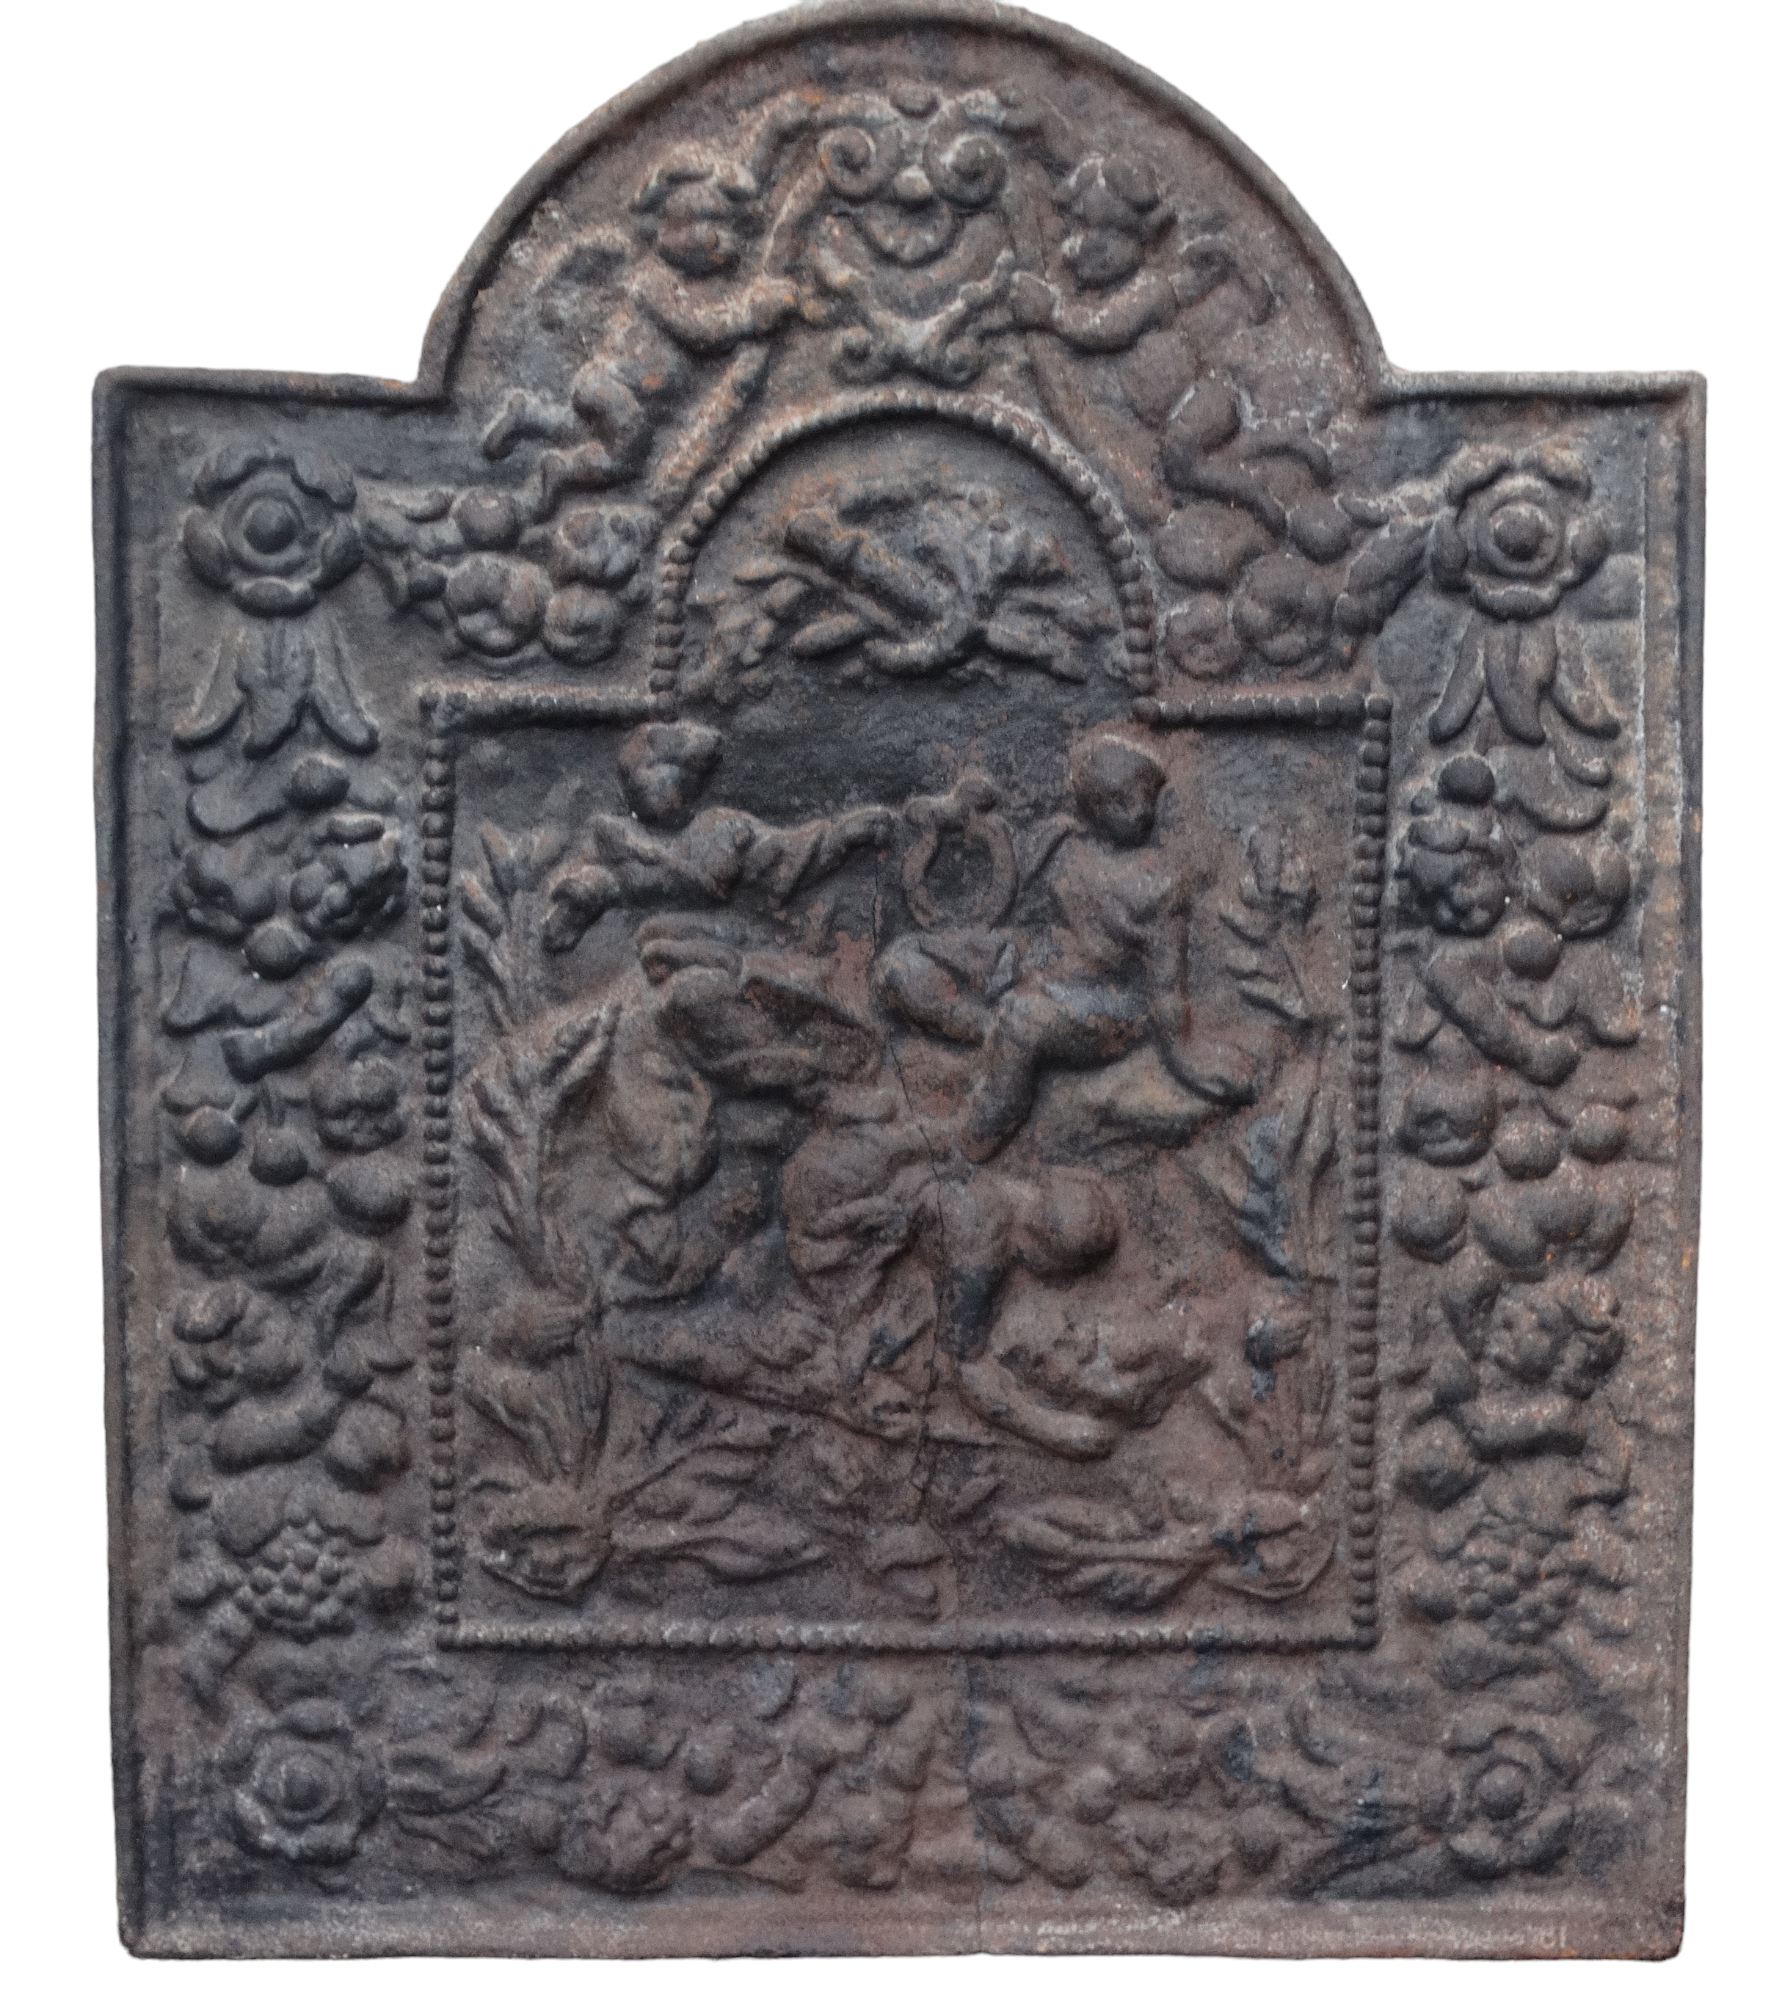 An 18th century cast iron fire back - decorated with cherubs within a broad foliate band, height